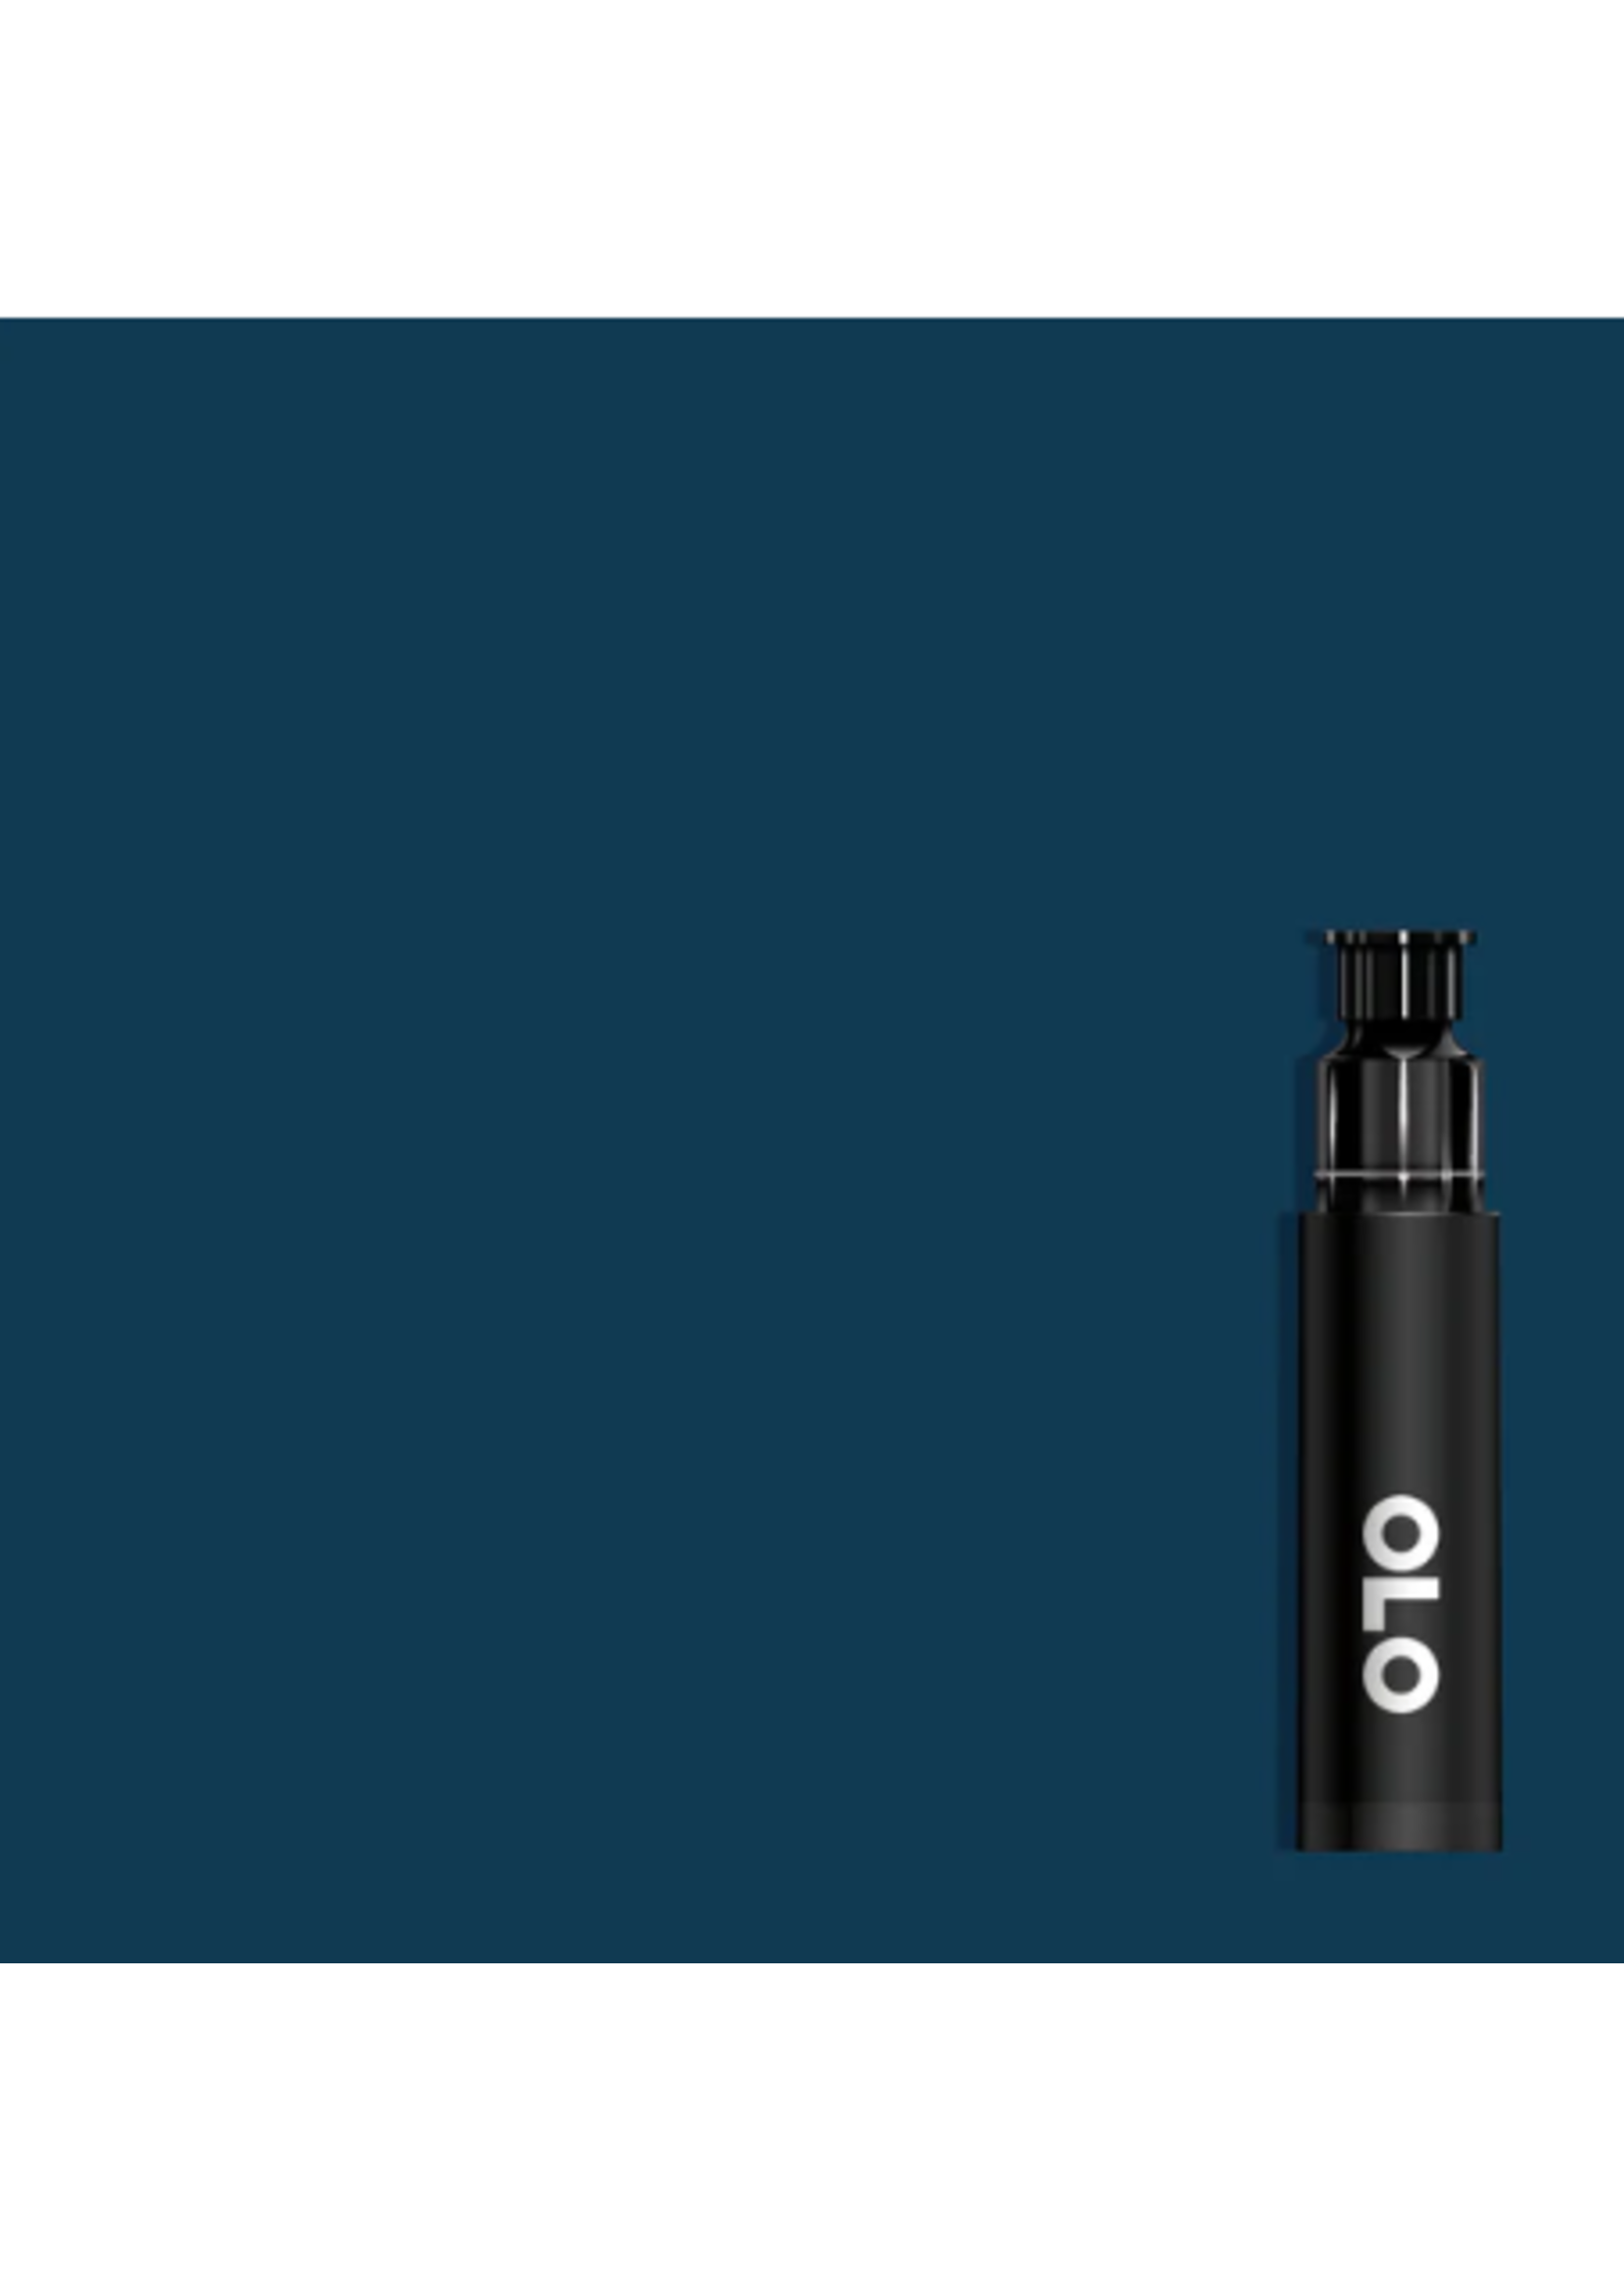 OLO OLO Brush Replacement Cartridge: Blueberry